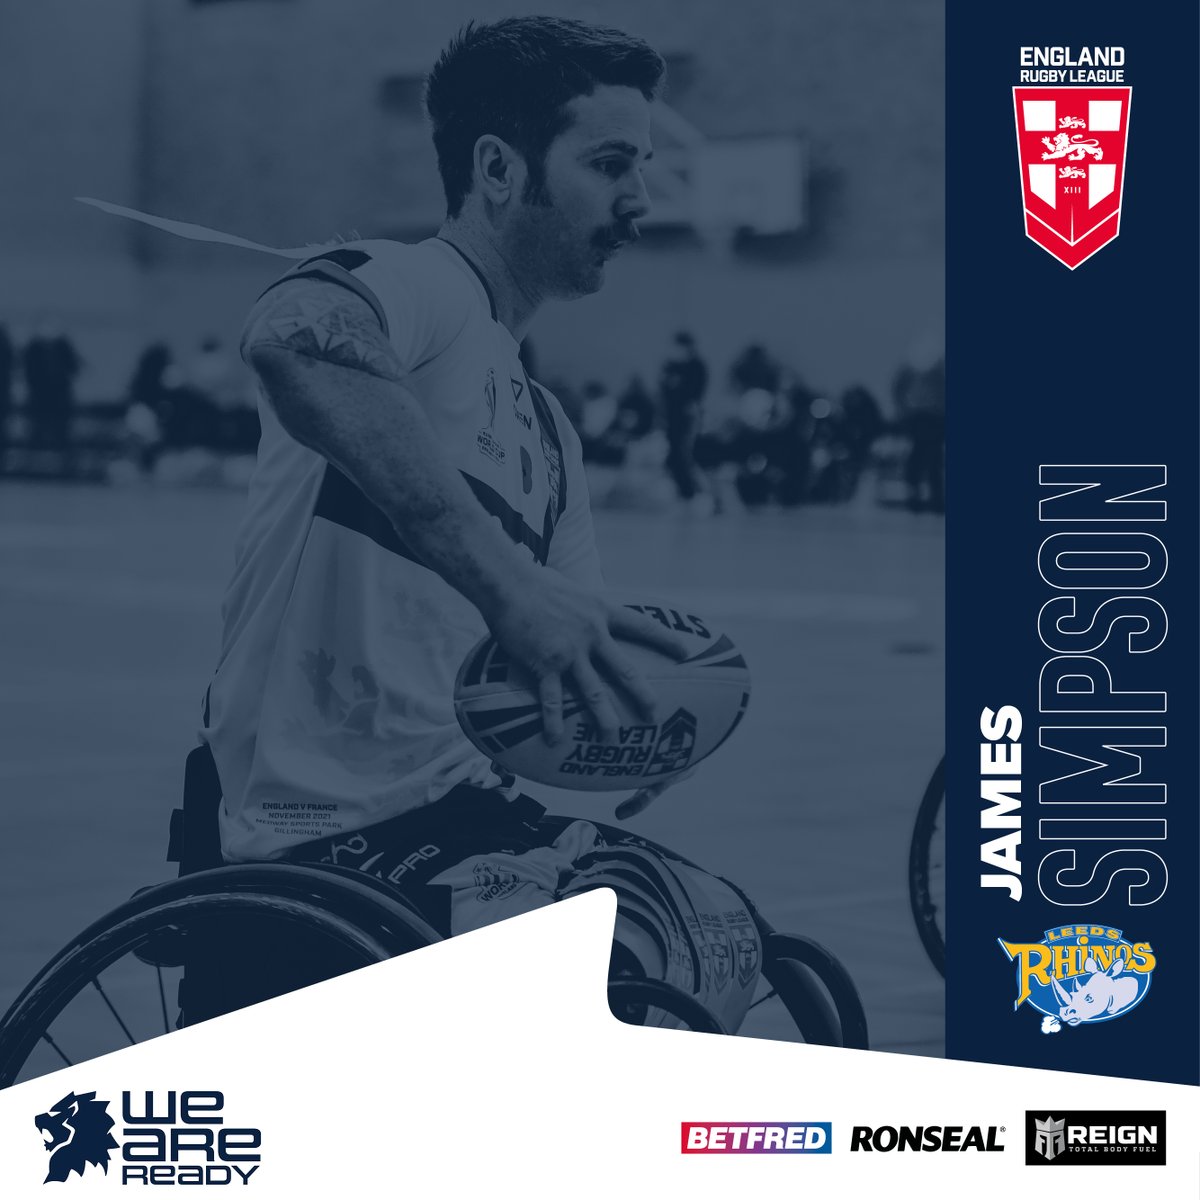 Absolutely fantastic news that our @leedsrhinos Wheelchair Player-Coach James Simpson has secured the final spot in the @England_RL Wheelchair @RLWC2021 squad! 

We can't think of anyone else more fitting of this opportunity, well done James! 👏 #TeamRhinos 